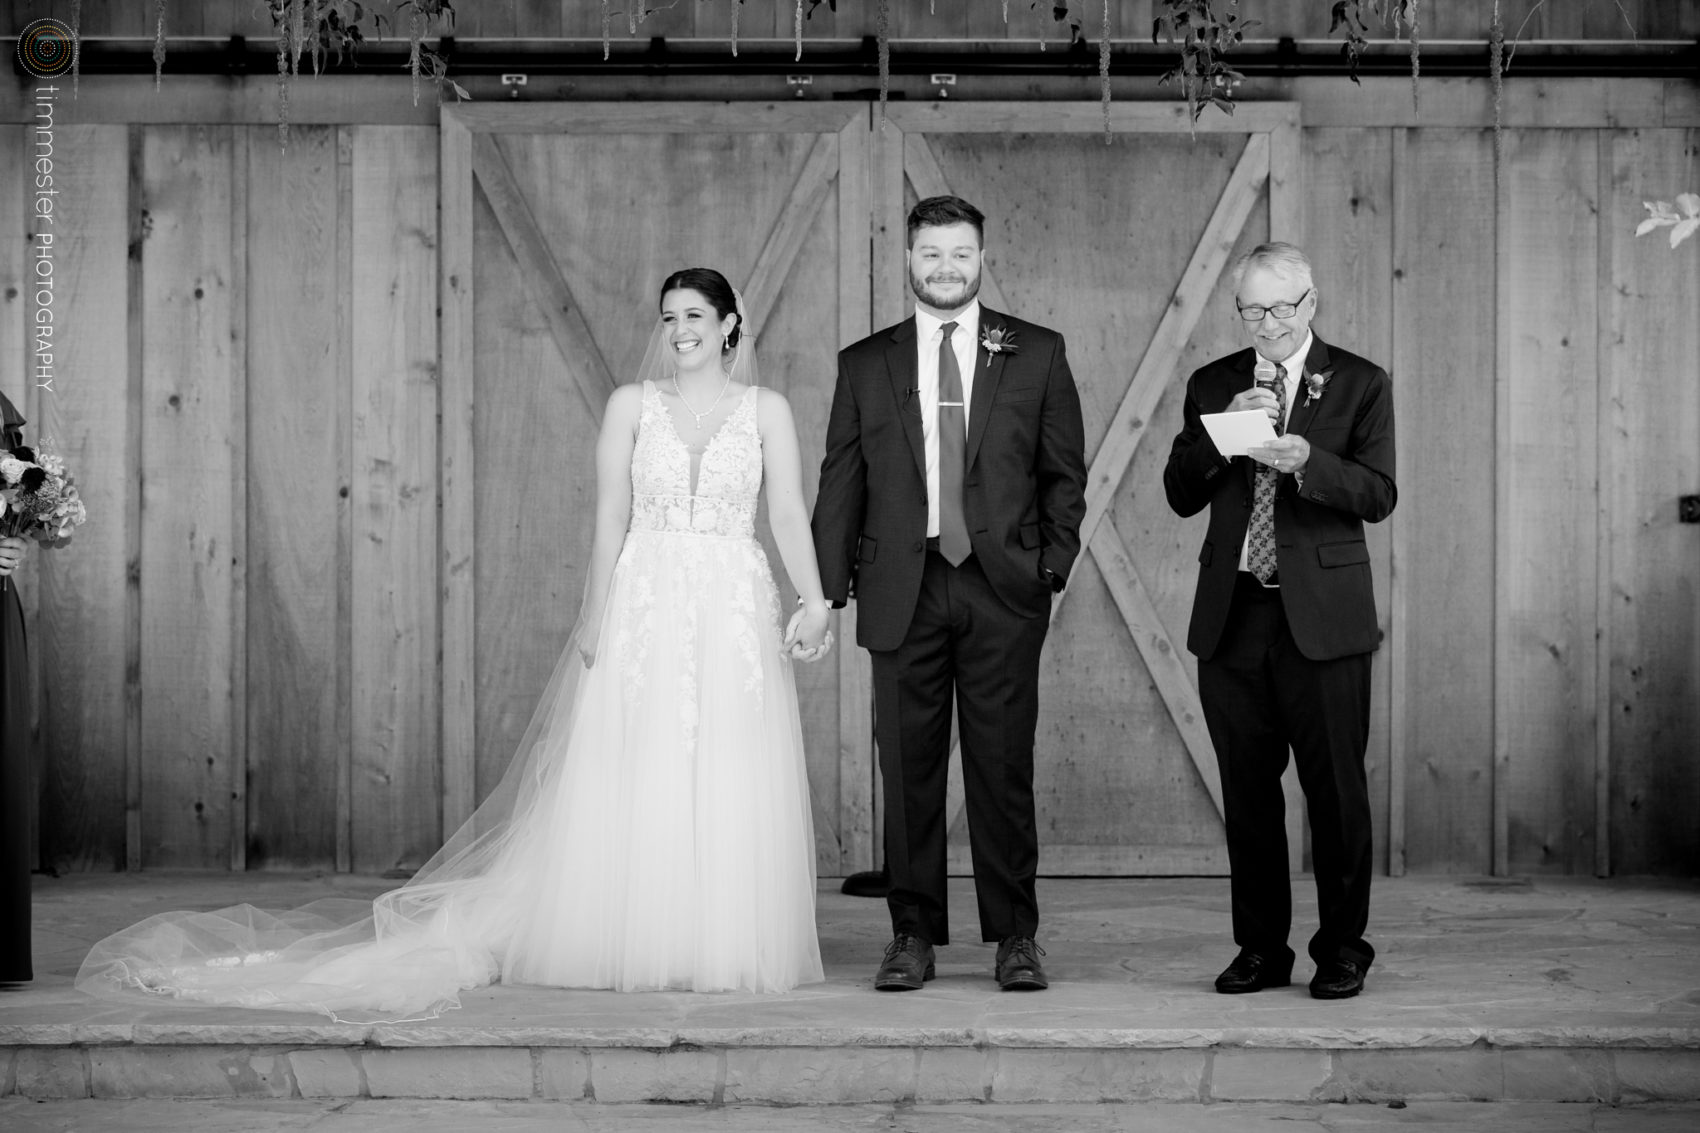 An October, outdoor wedding ceremony in Siler City, NC at Rivers & Bridges.